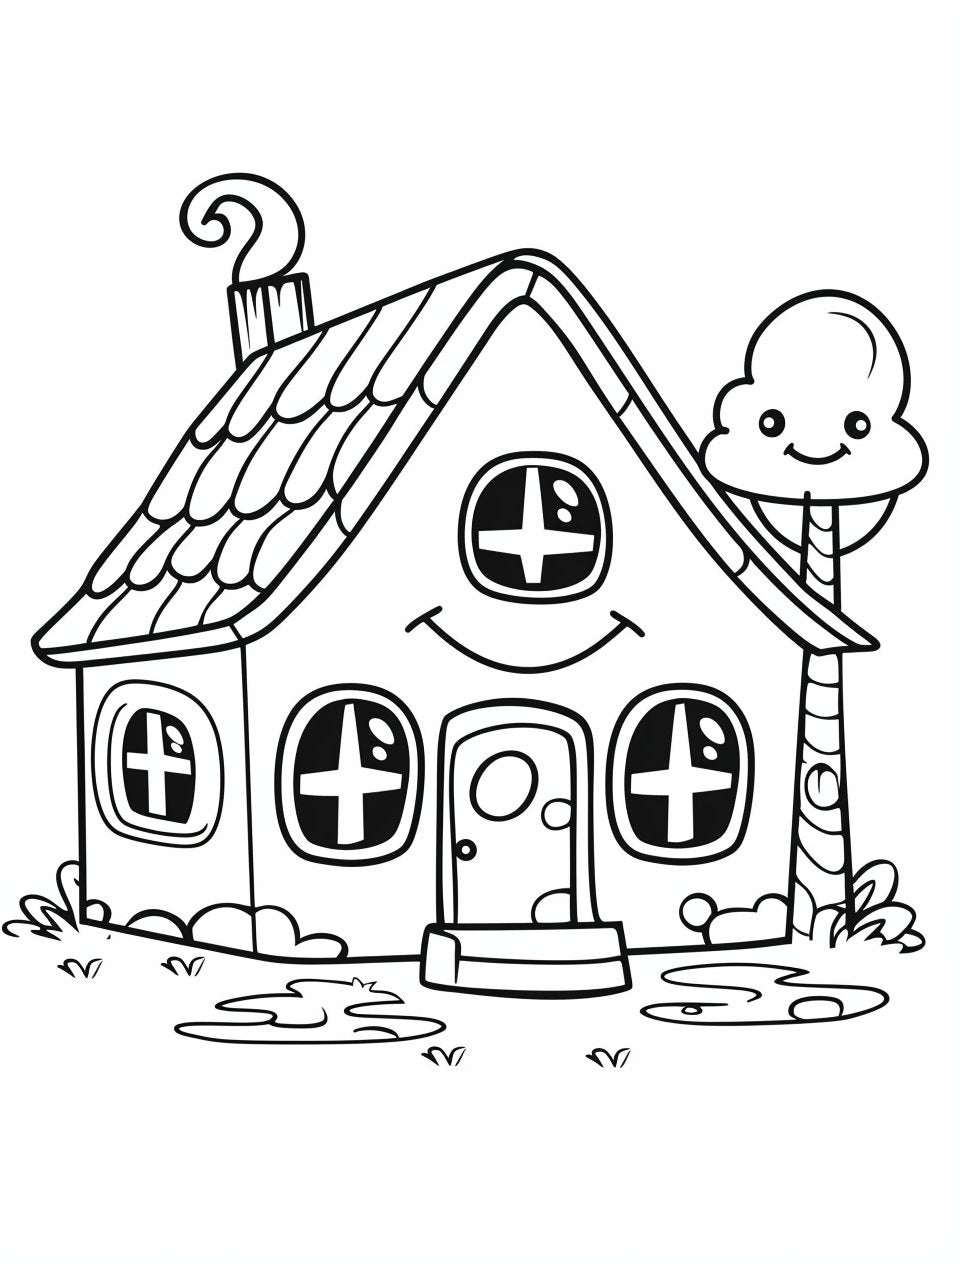 25 FREE House Coloring Sheets - My Coloring Zone